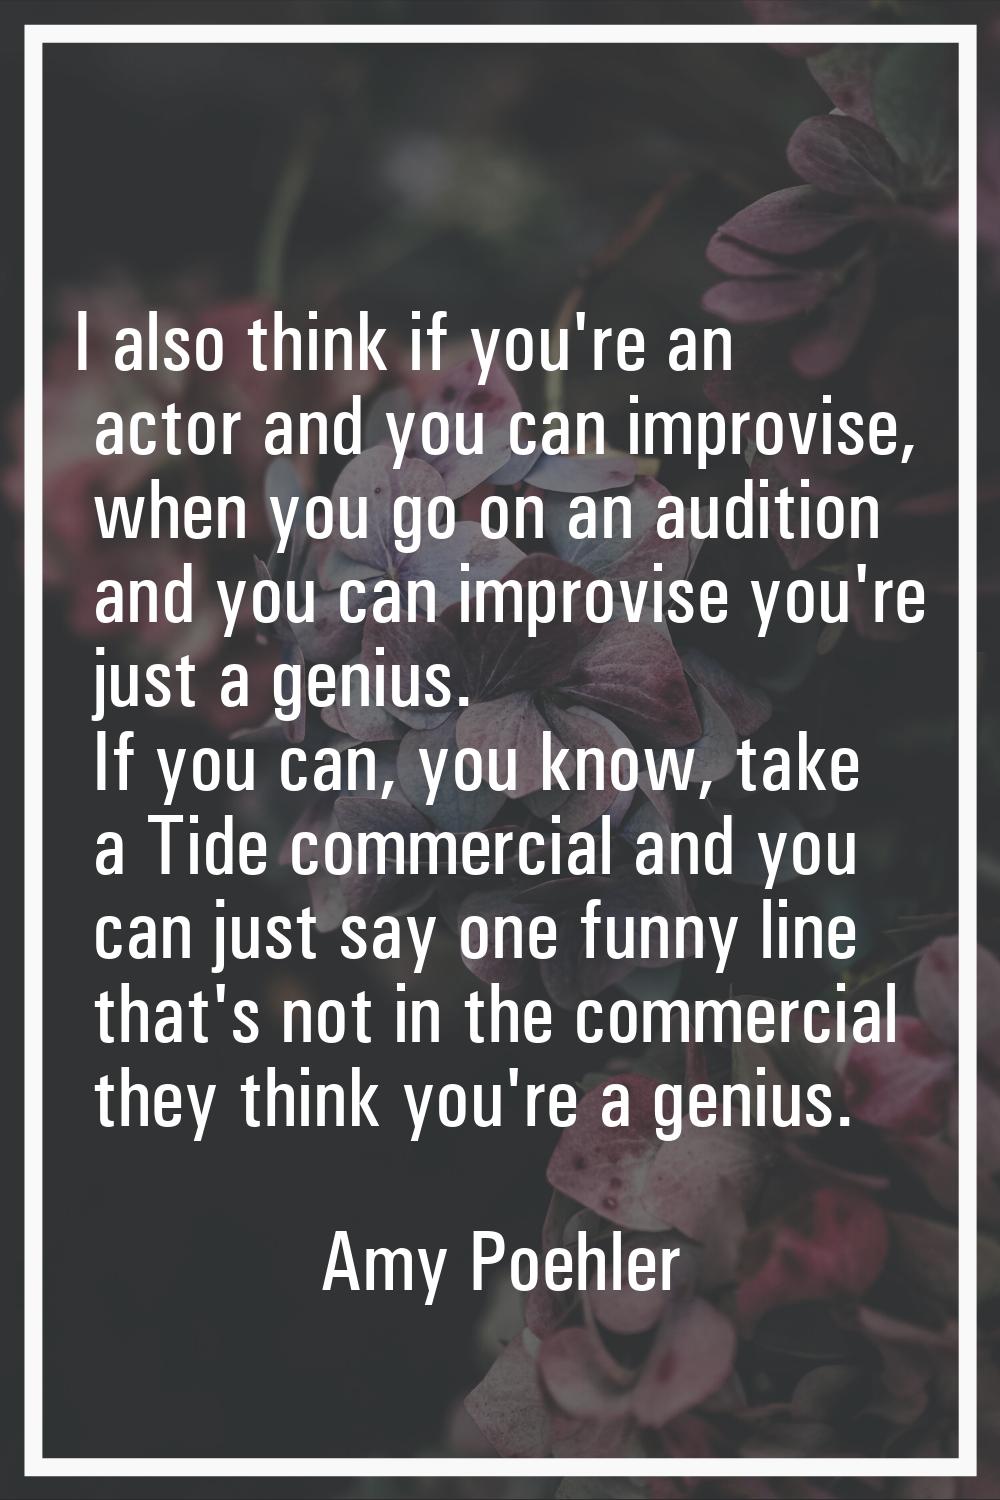 I also think if you're an actor and you can improvise, when you go on an audition and you can impro